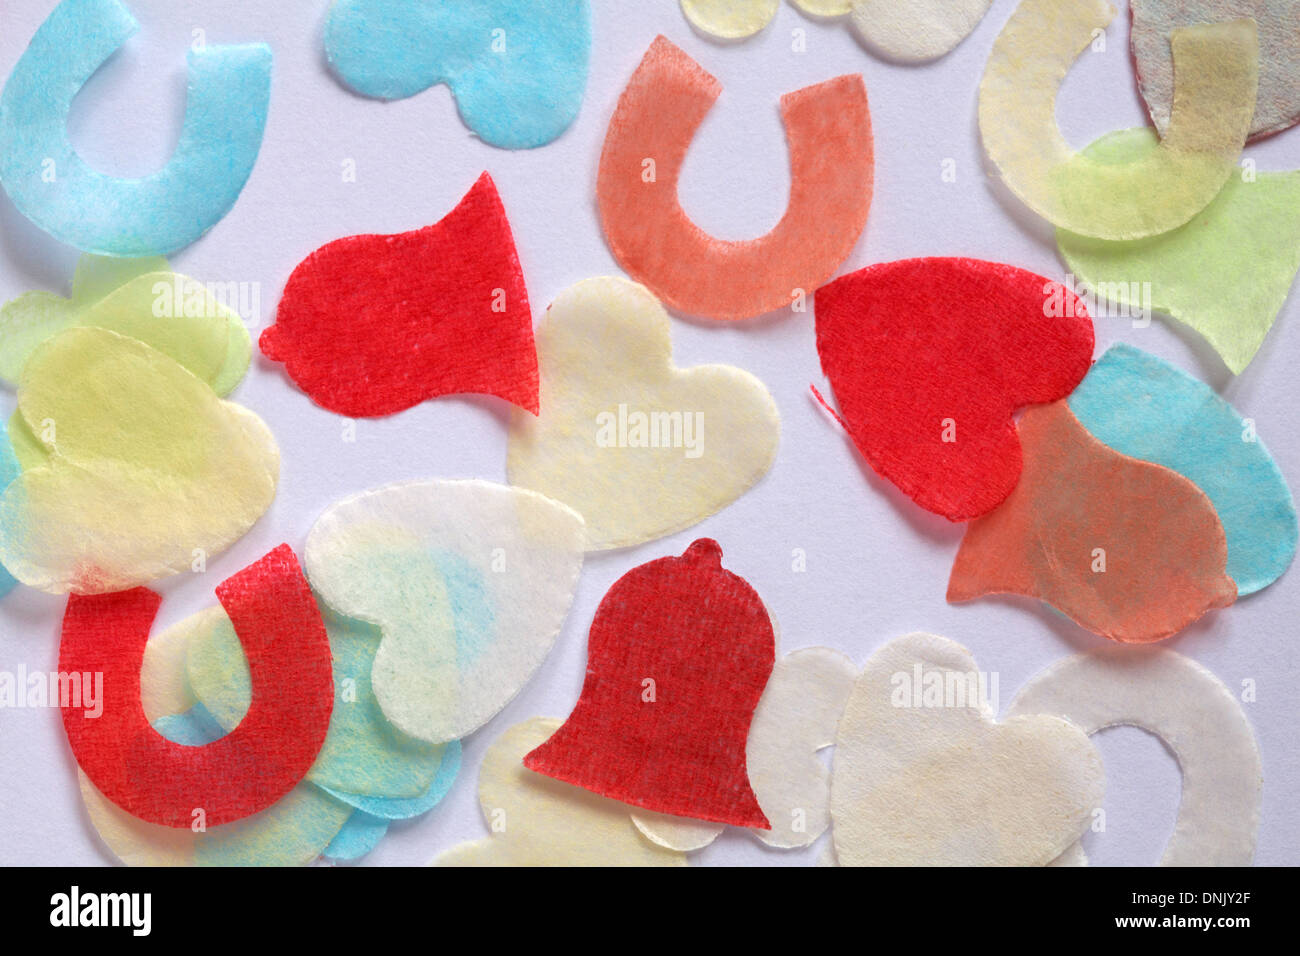 bio-degradable wedding confetti spread out on white background close up Stock Photo